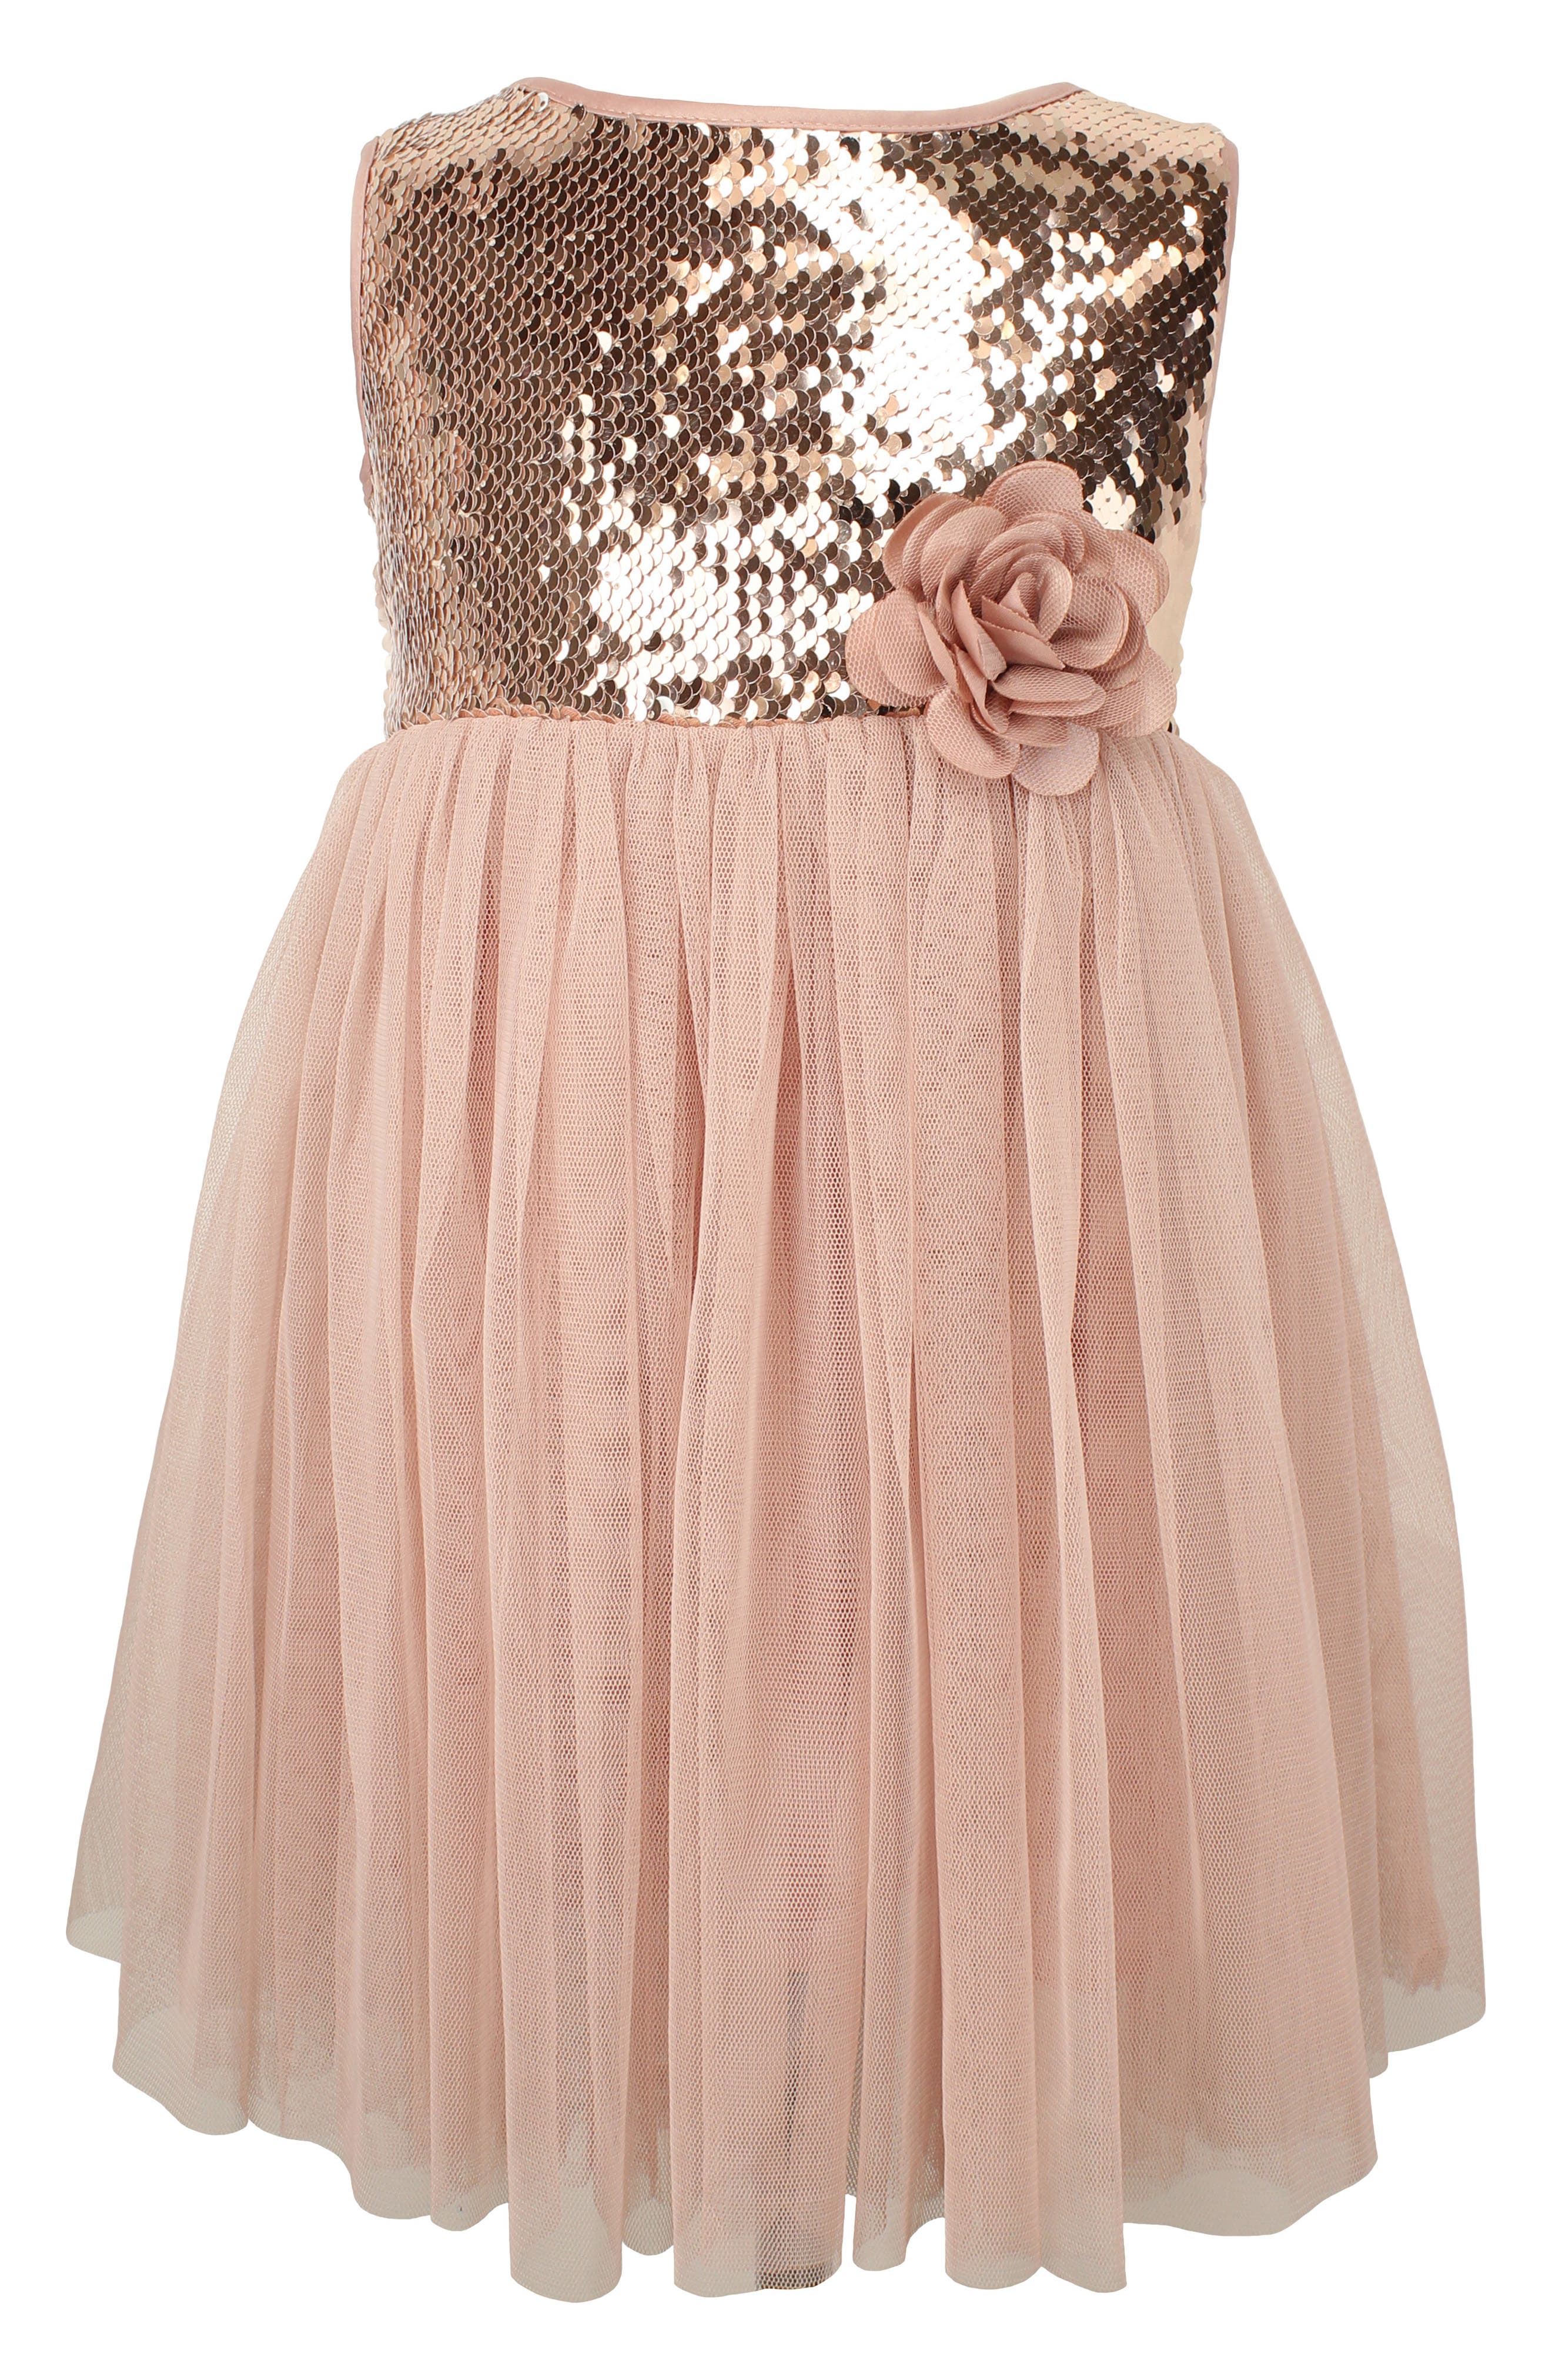 girly party dresses